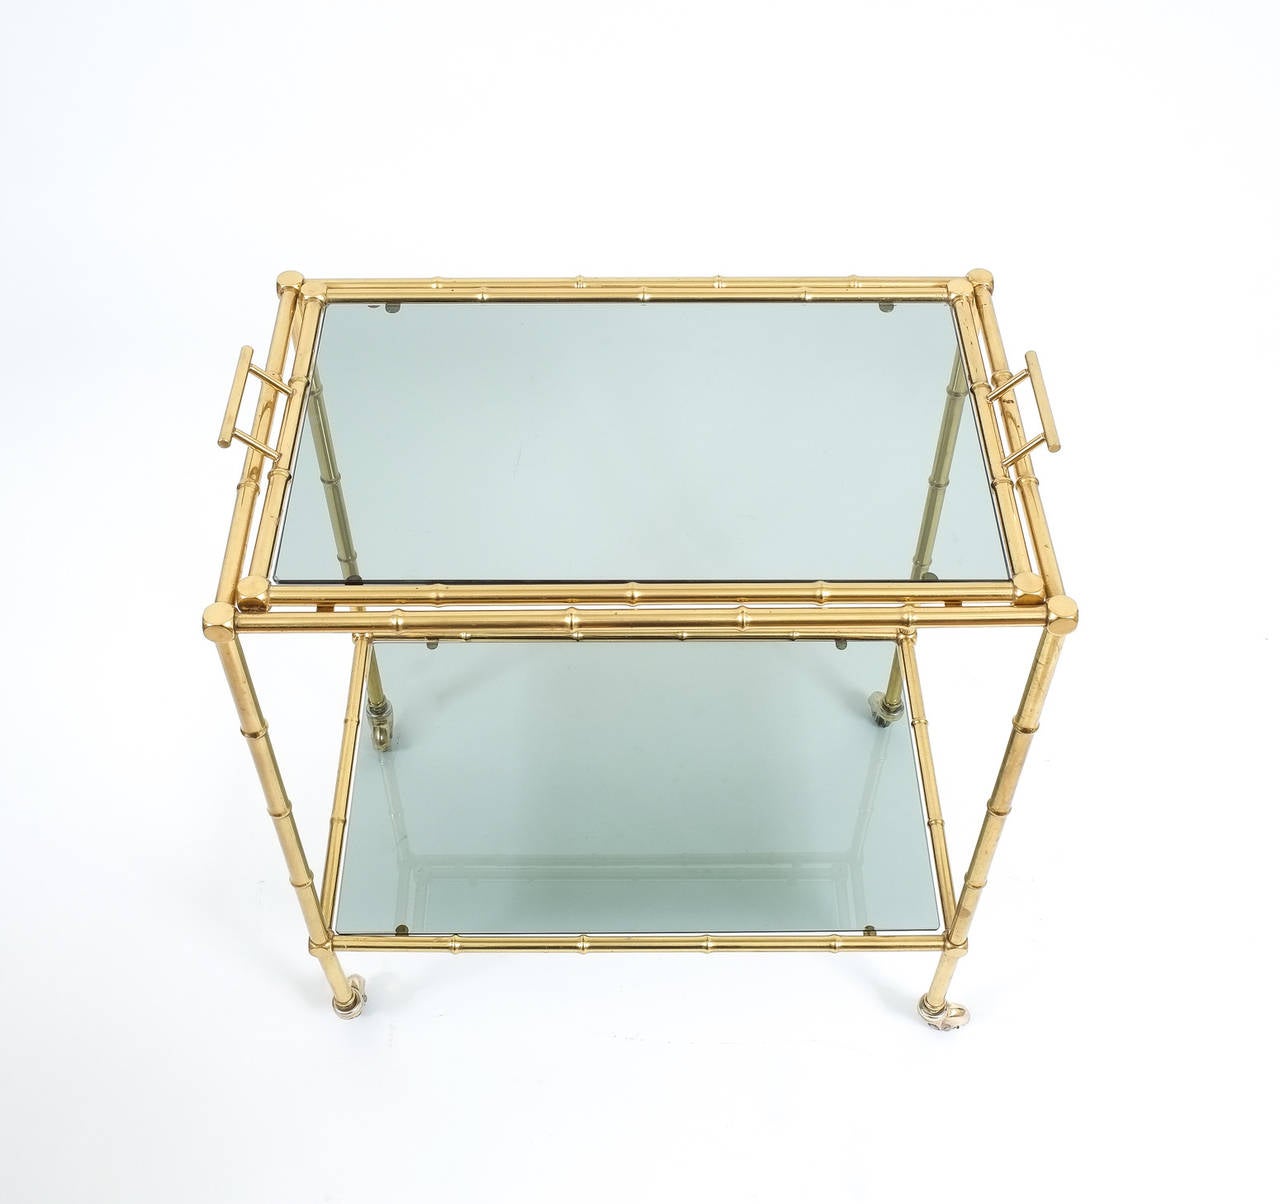 Faux bamboo brass bar cart with removable glass tray, France, circa 1960

Elegant midcentury liquor or bar cart table from France in the tradition of Maison Bagues with a removable glass tray and abstracted faux bamboo brass hardware. The glass is